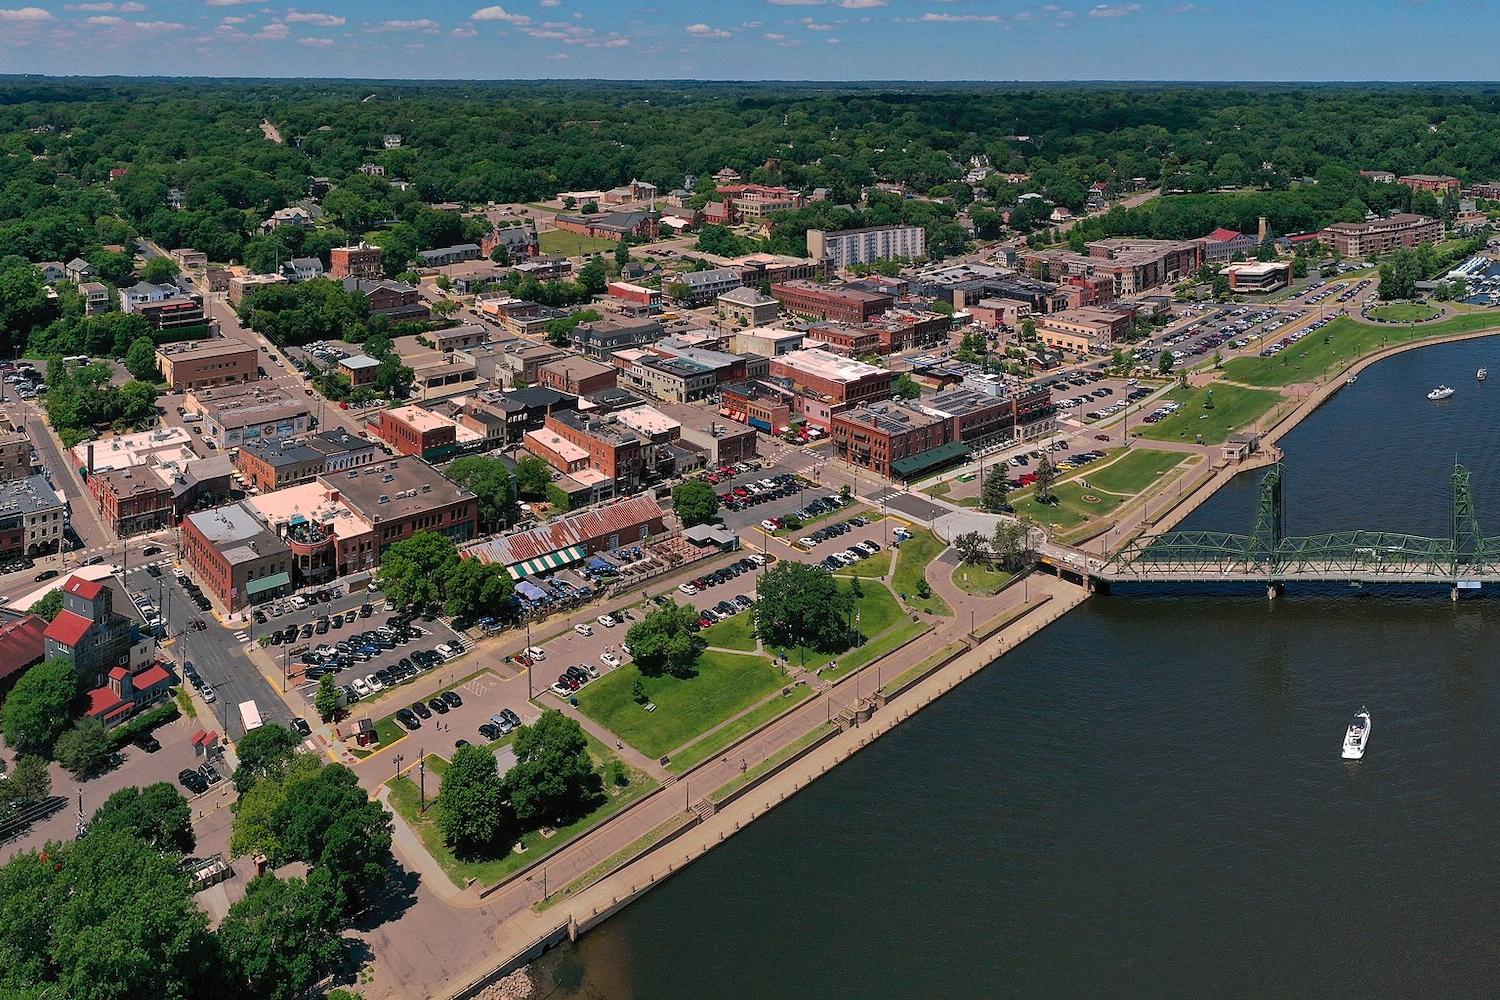 Stillwater Oklahoma aerial shot — Stillwater is among the small towns impacted by anti-ESG legislation